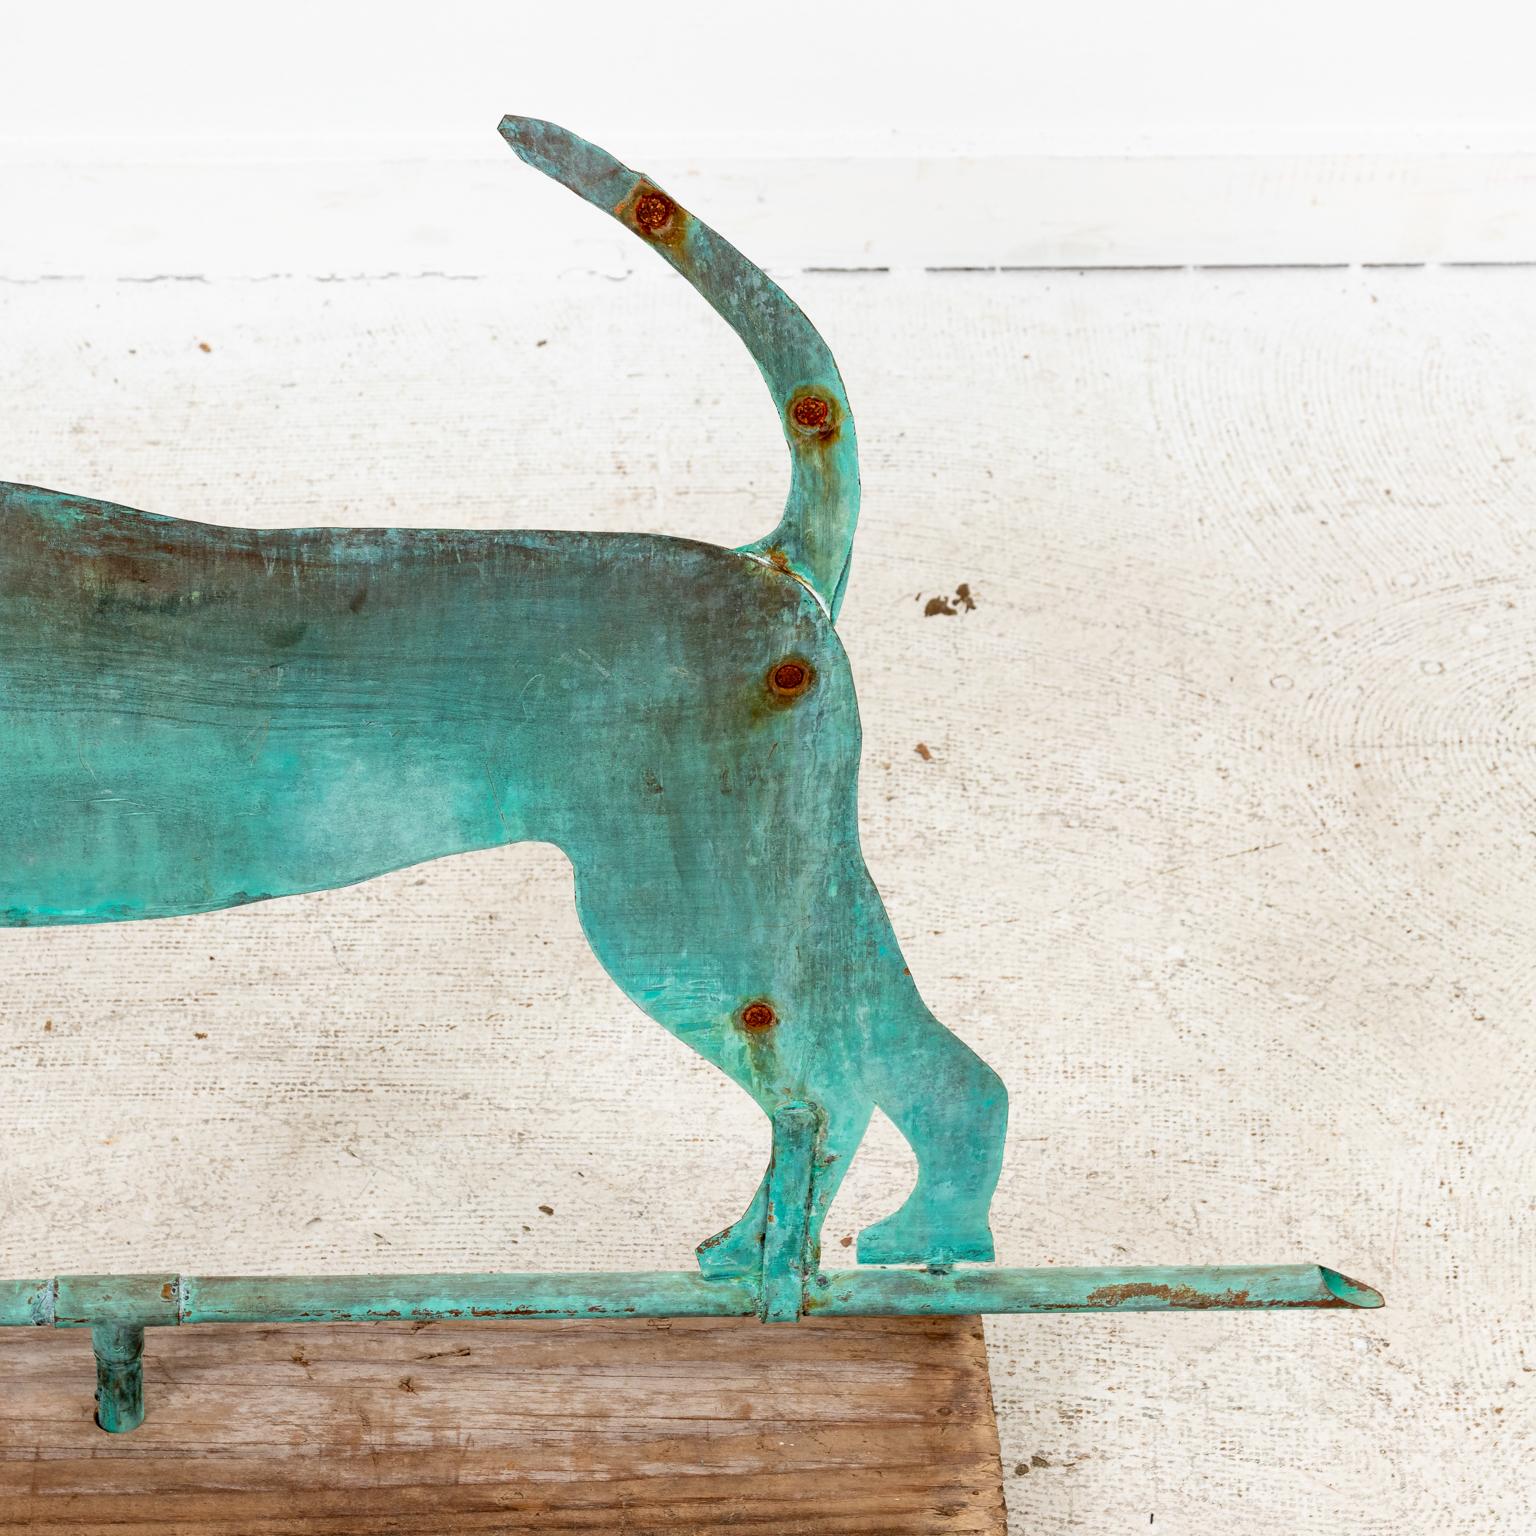 Circa 20th century Folk Art style Copper hound dog weathervane with verdigris patina, mounted on rustic pinewood stand base. Made in the United States. Please note of wear consistent with age including some rusted, oxidized rivets due to exposure to